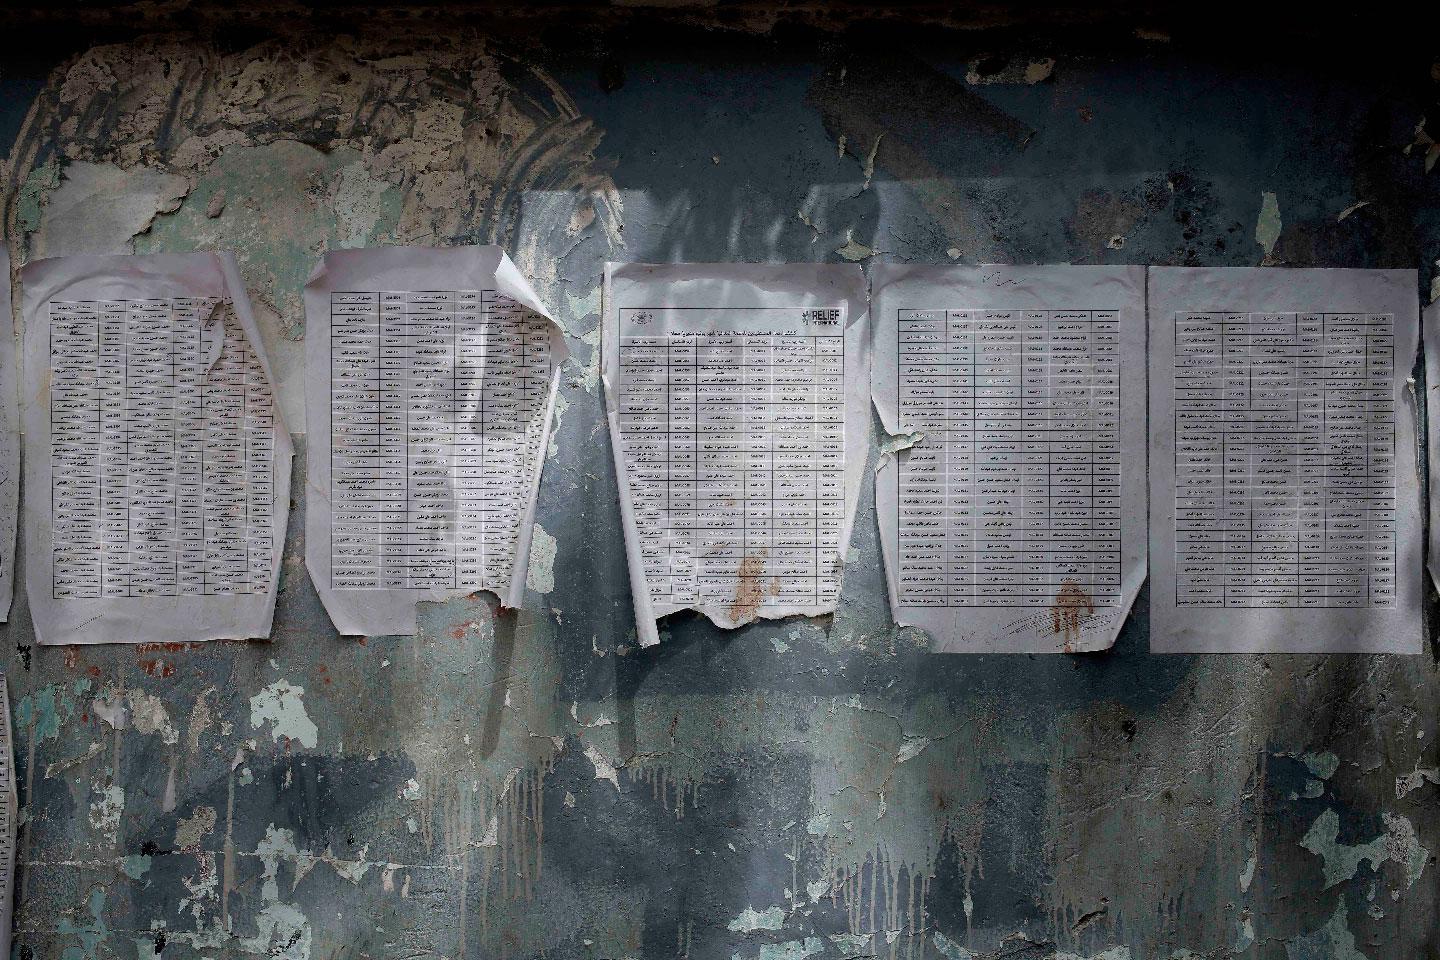 A worn-out list of registered names for aid by Relief International, part of the World Food Program, is posted in Aden, Yemen on July 23, 2018.